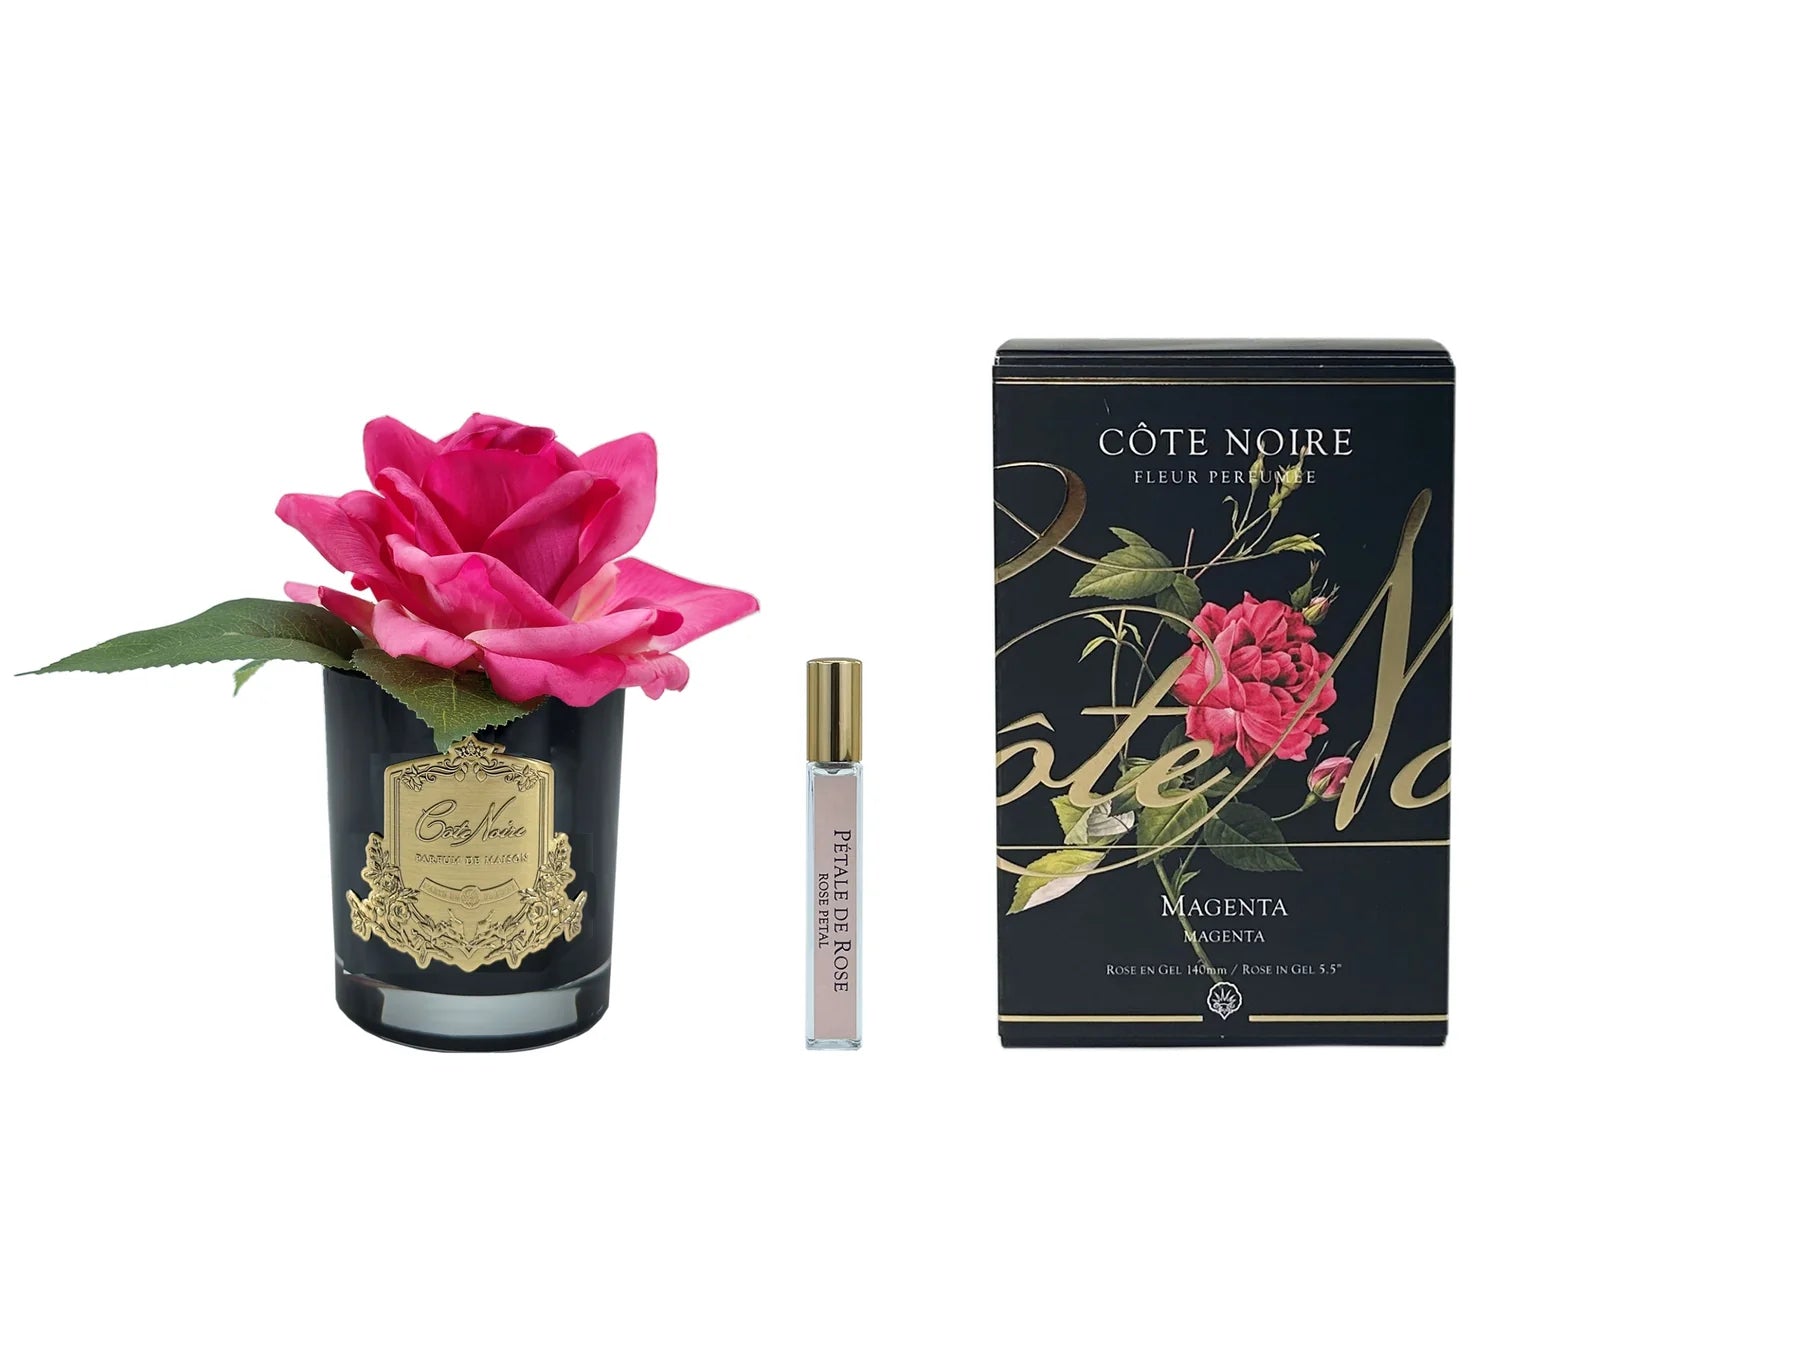 COTE NOIRE - PERFUMED NATURAL TOUCH SINGLE ROSE - MAGENTA